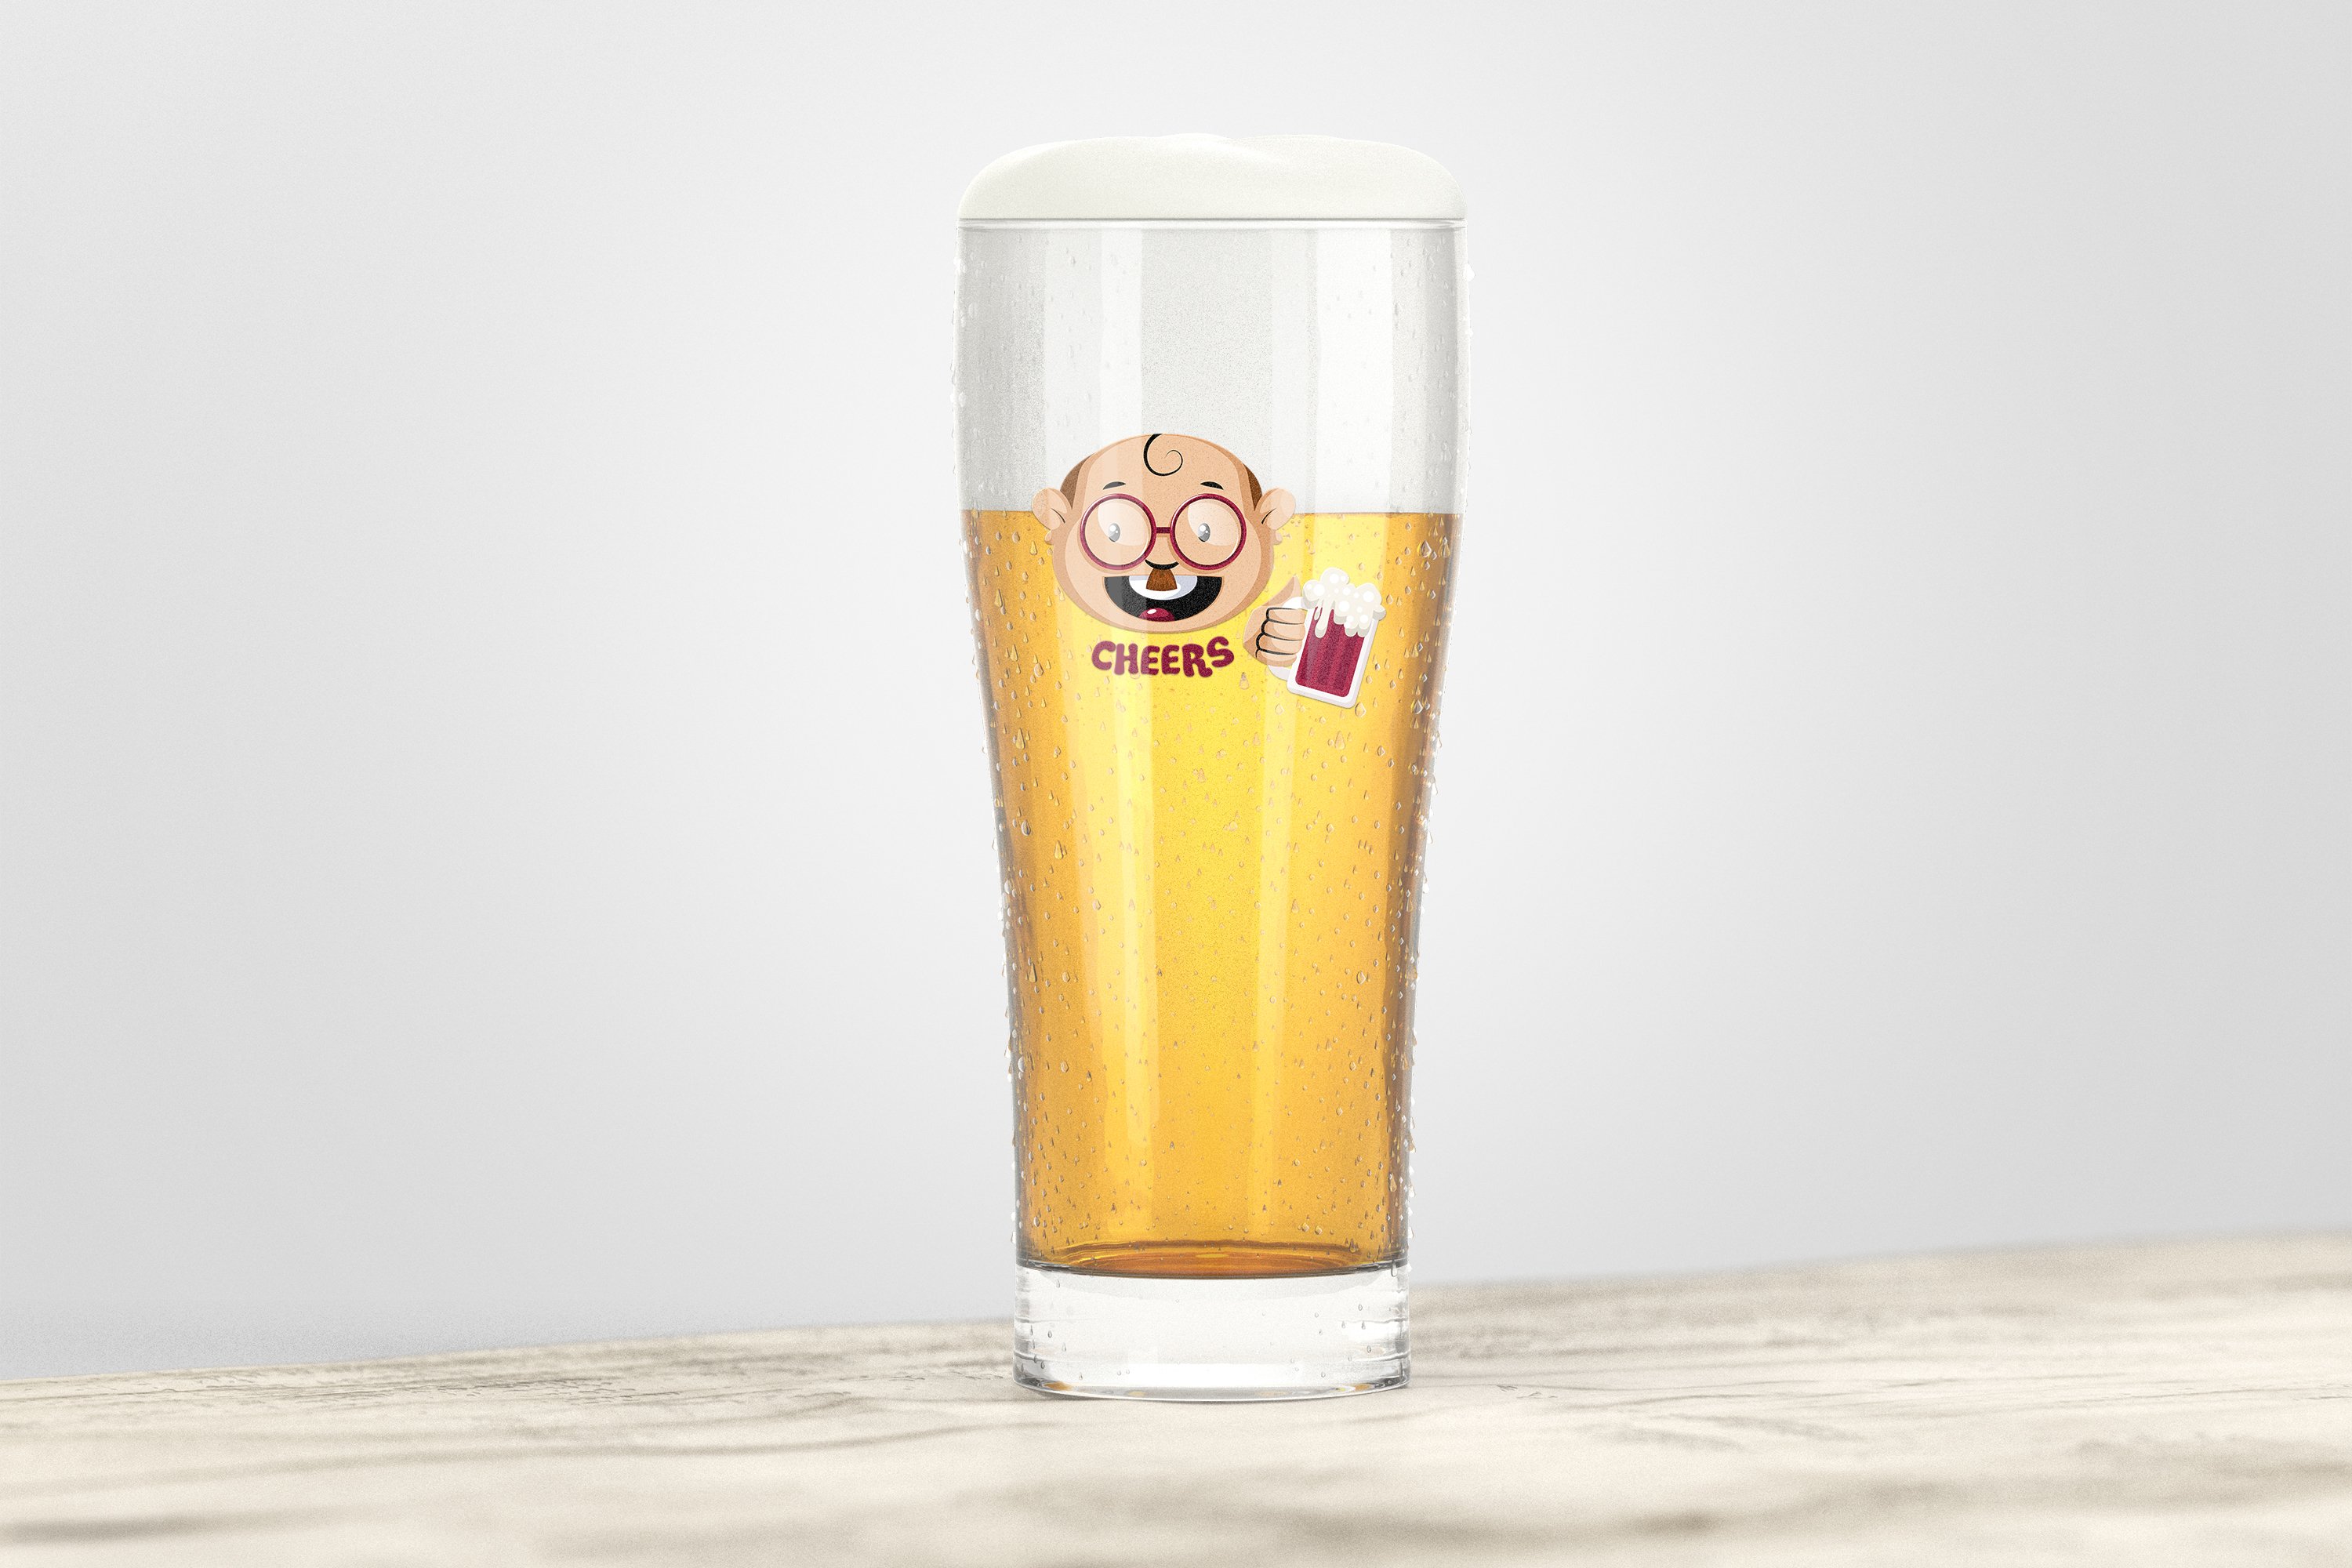 Image of glass of beer with funny emoticons of bald man in glasses.